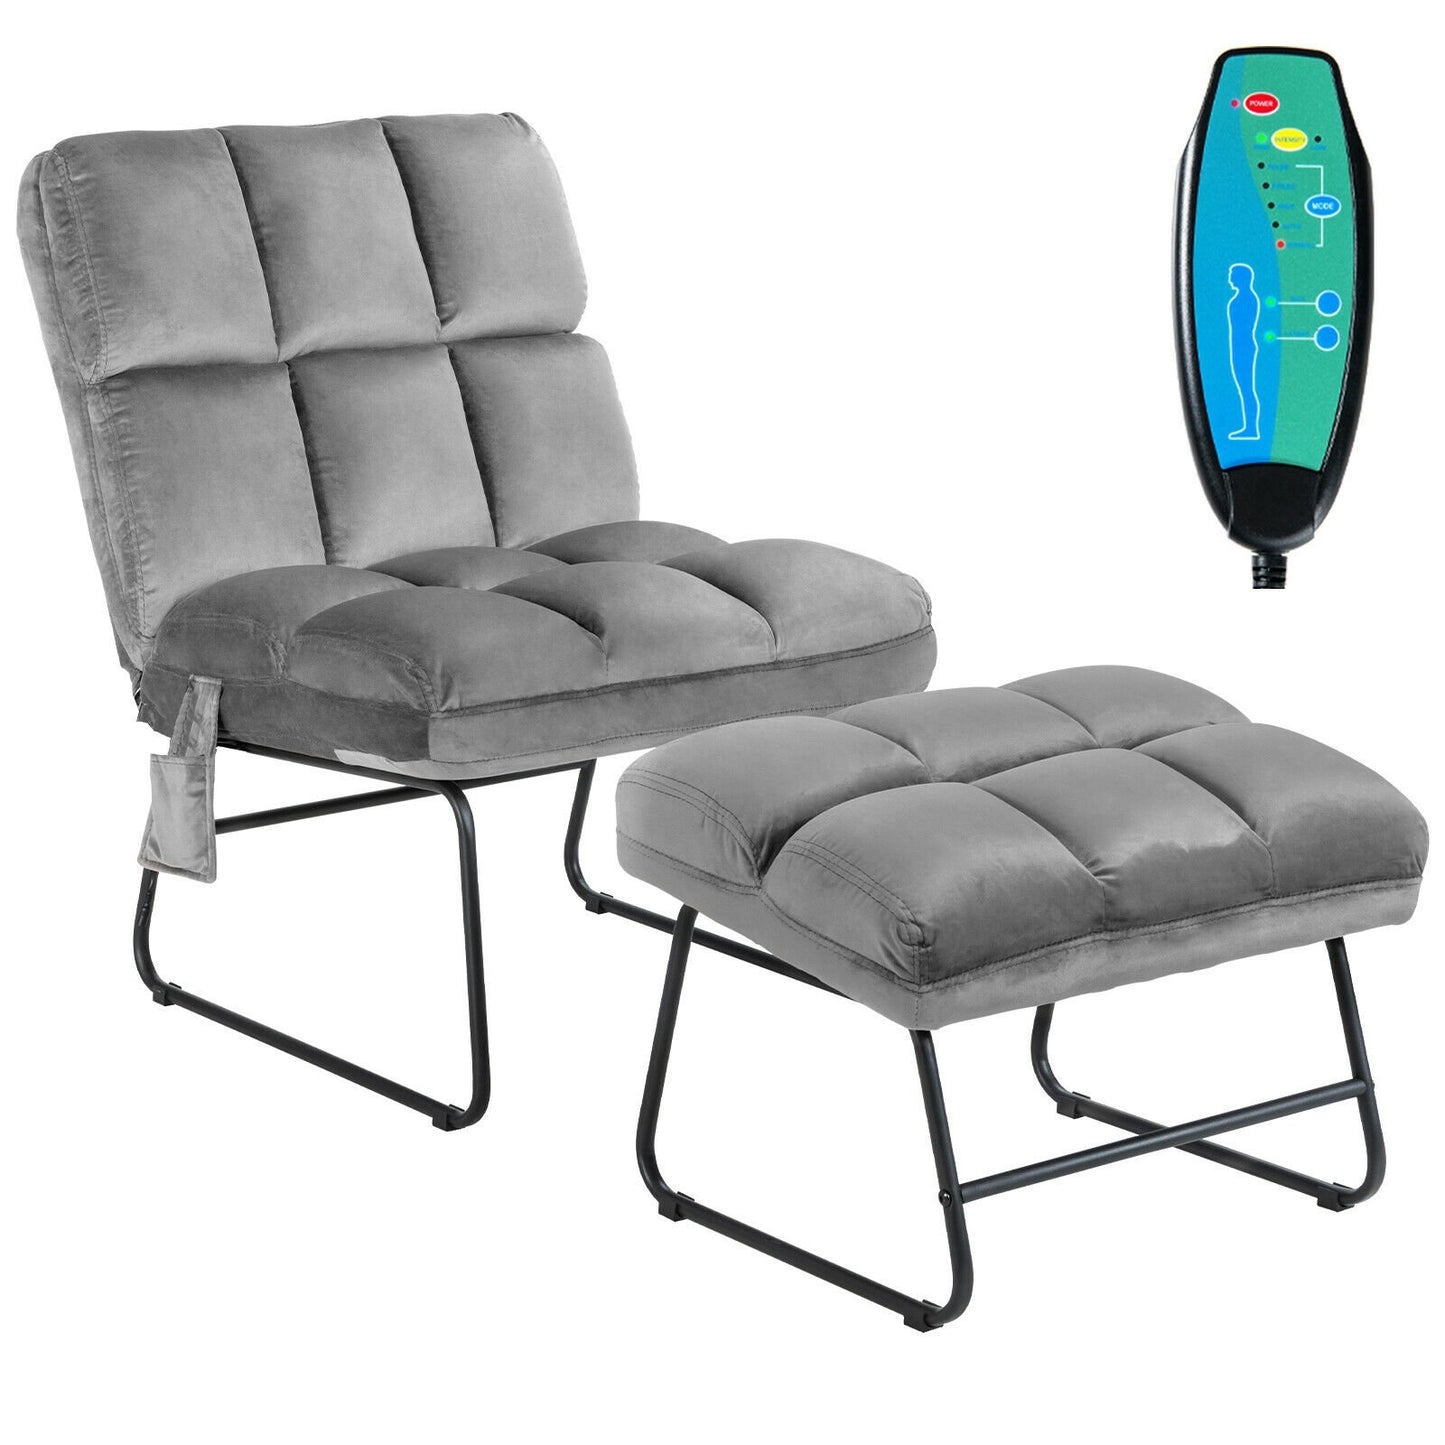 Massage Chair Velvet Accent Sofa Chair with Ottoman and Remote Control - Gray, Gray